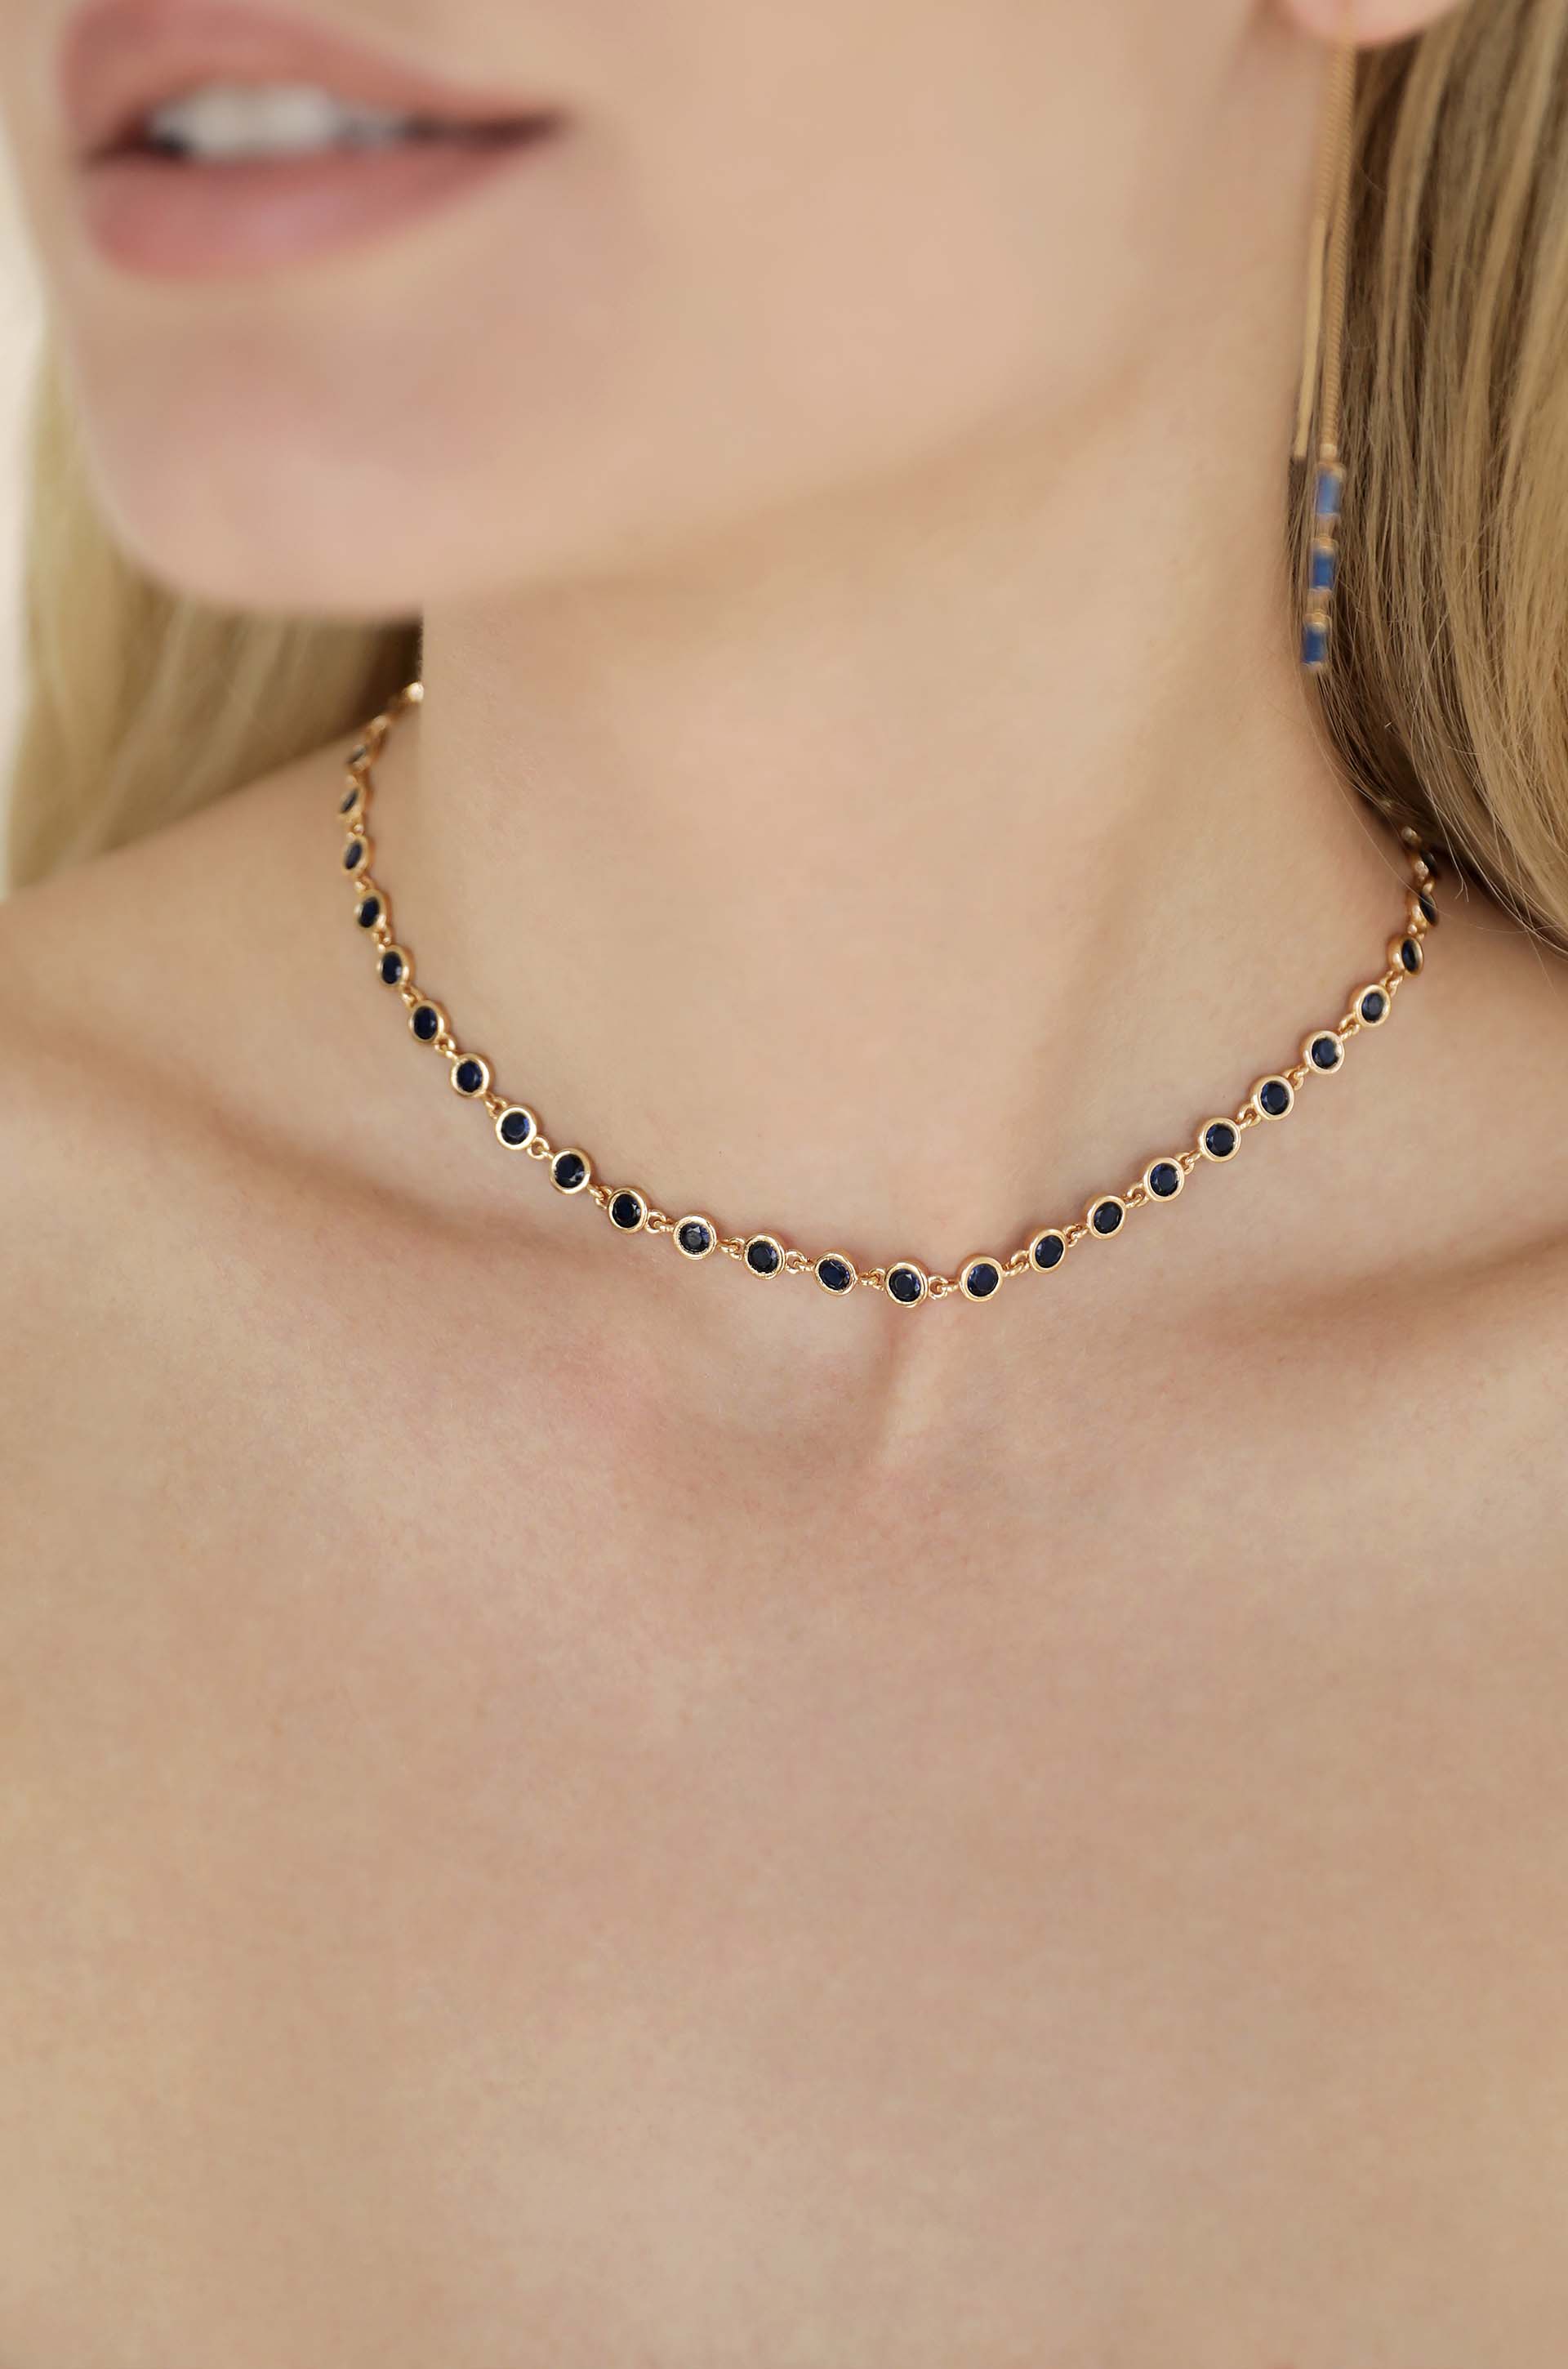 Triple Stacked Beaded Chain Necklace | Caitlyn Minimalist 18K Gold